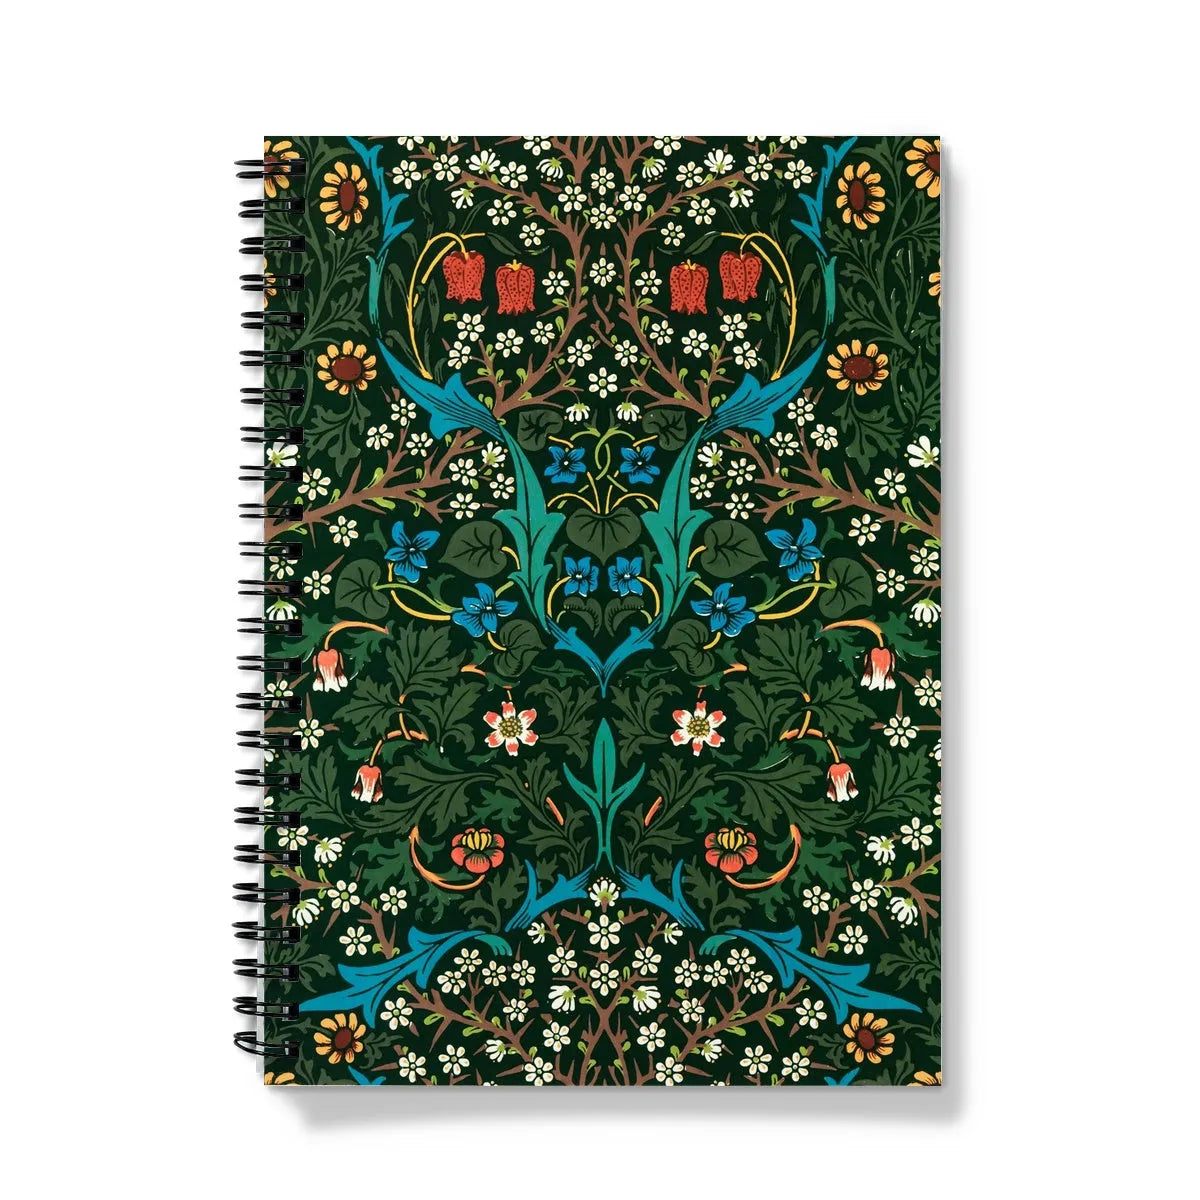 Blackthorn Hawthorn By William Morris Notebook - A5 - Graph Paper - Notebooks & Notepads - Aesthetic Art